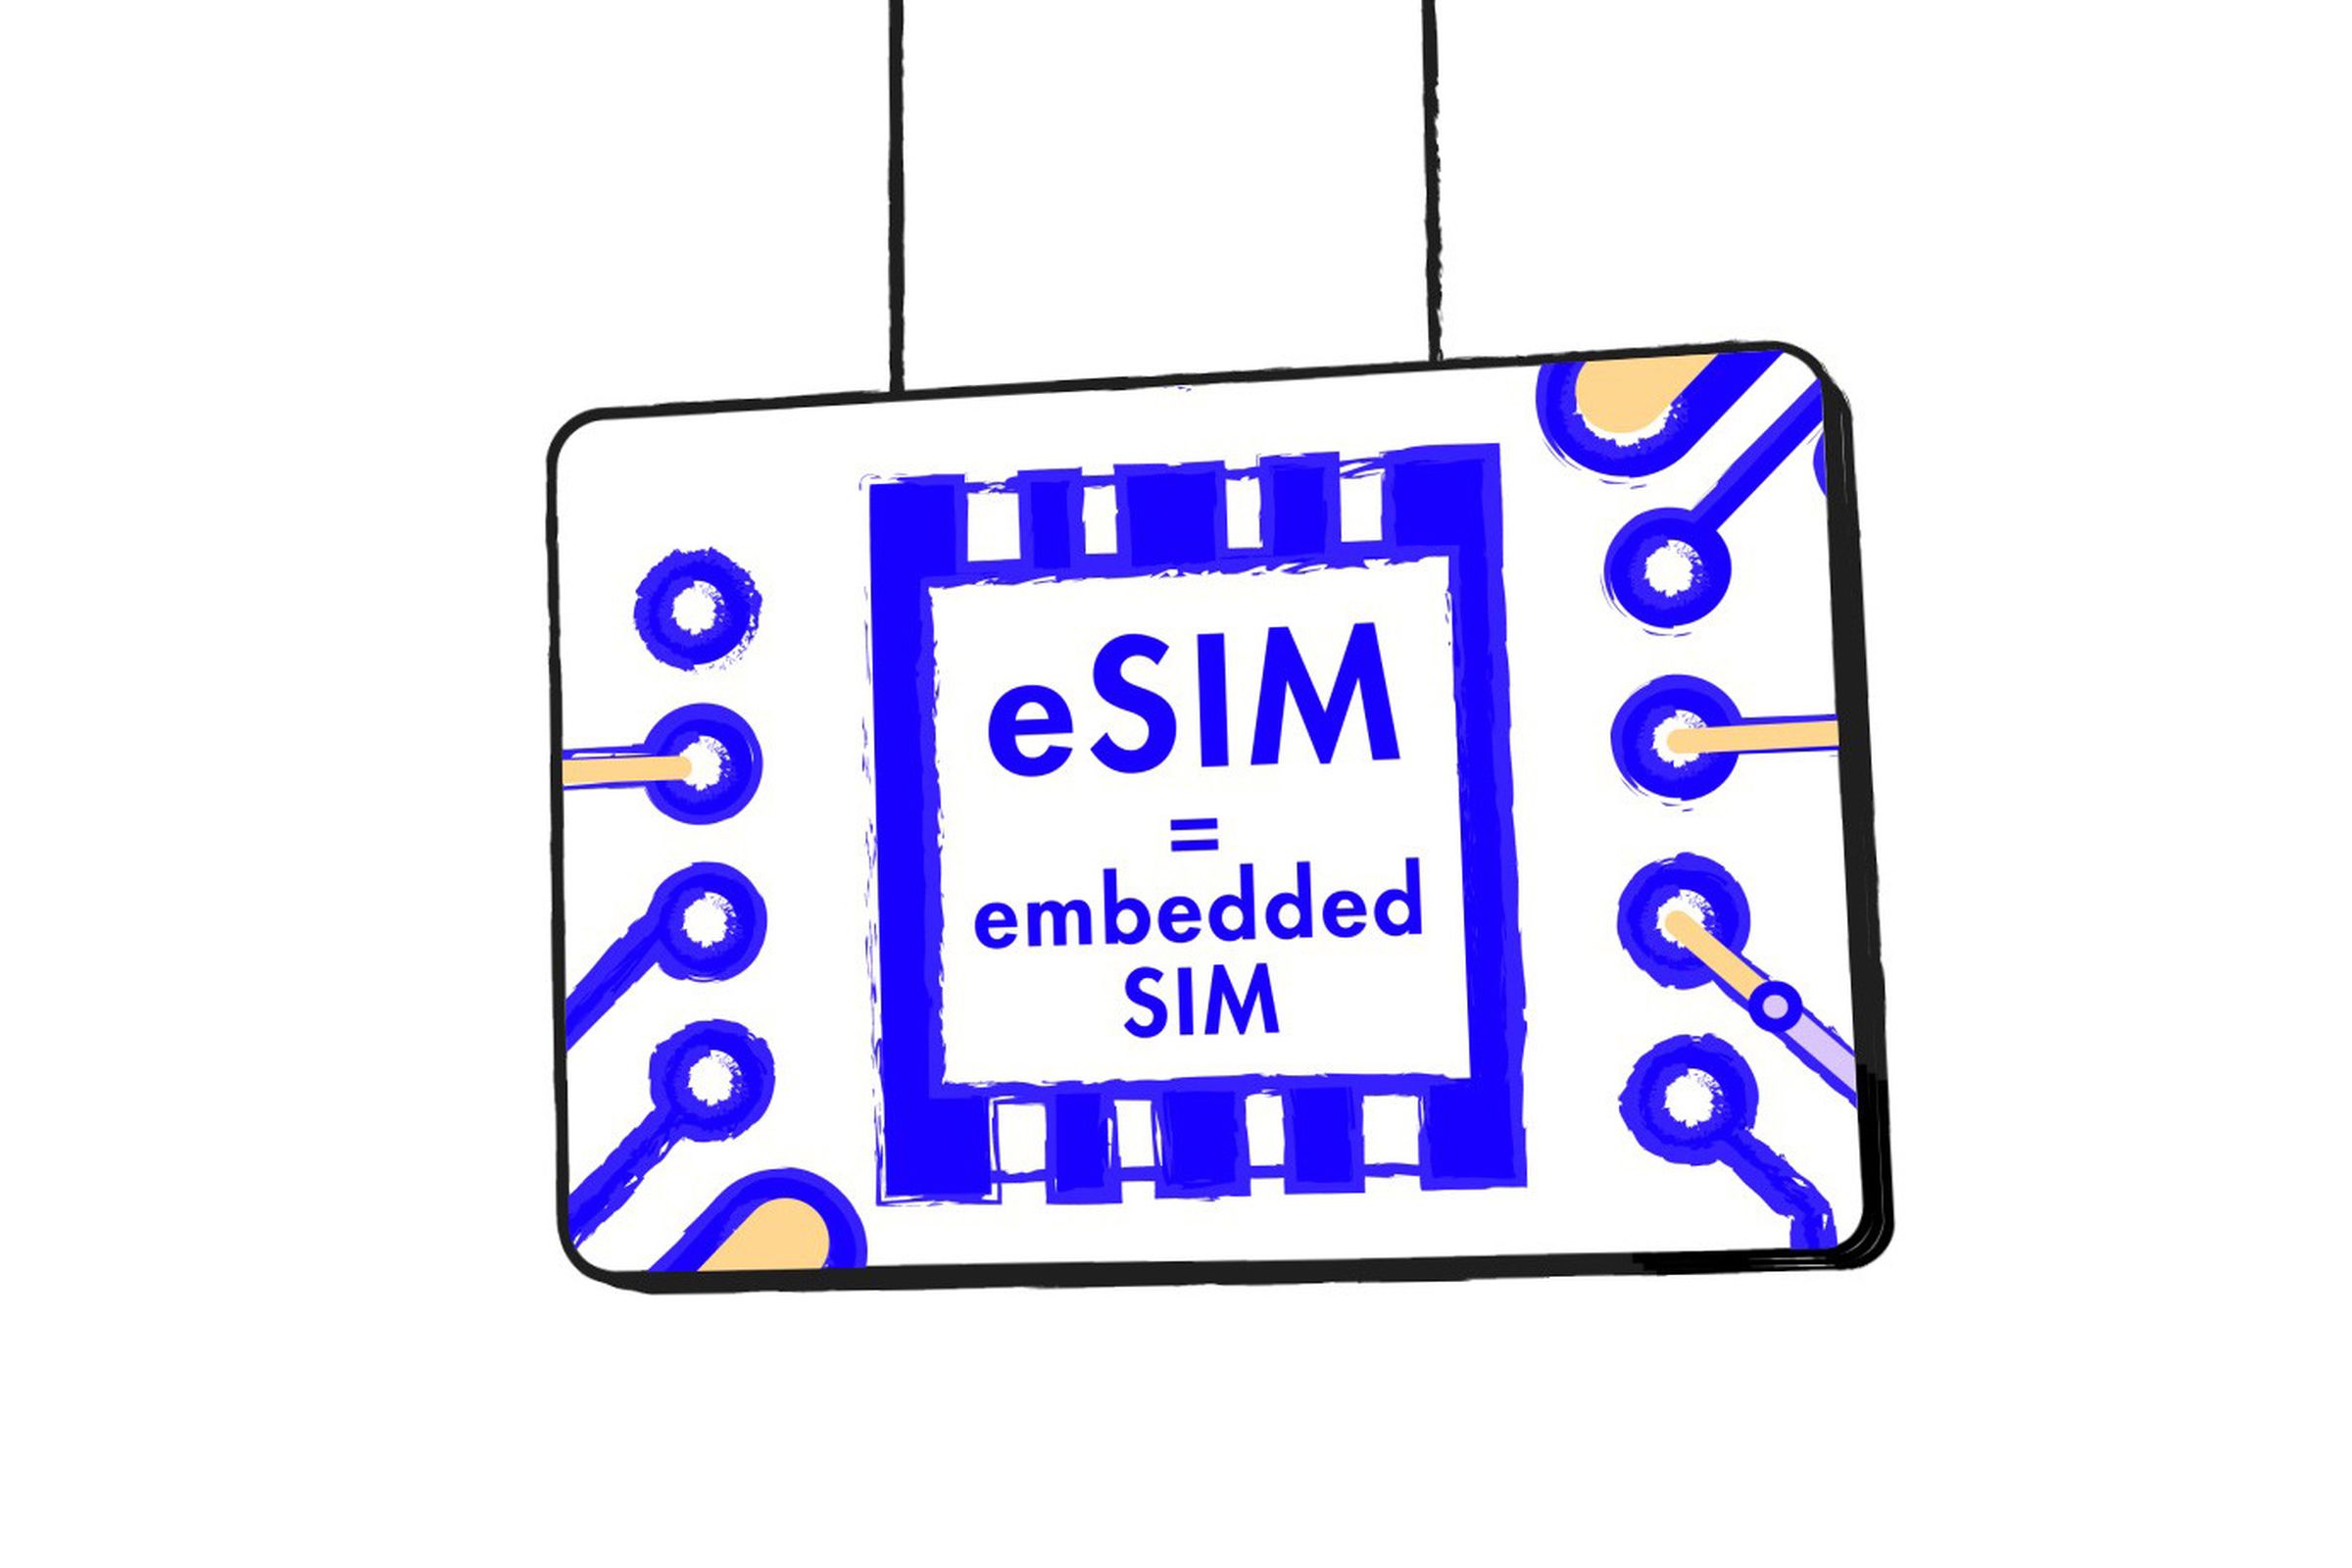 eSIM makes it possible to activate your device with a new carrier without waiting for a physical SIM card.